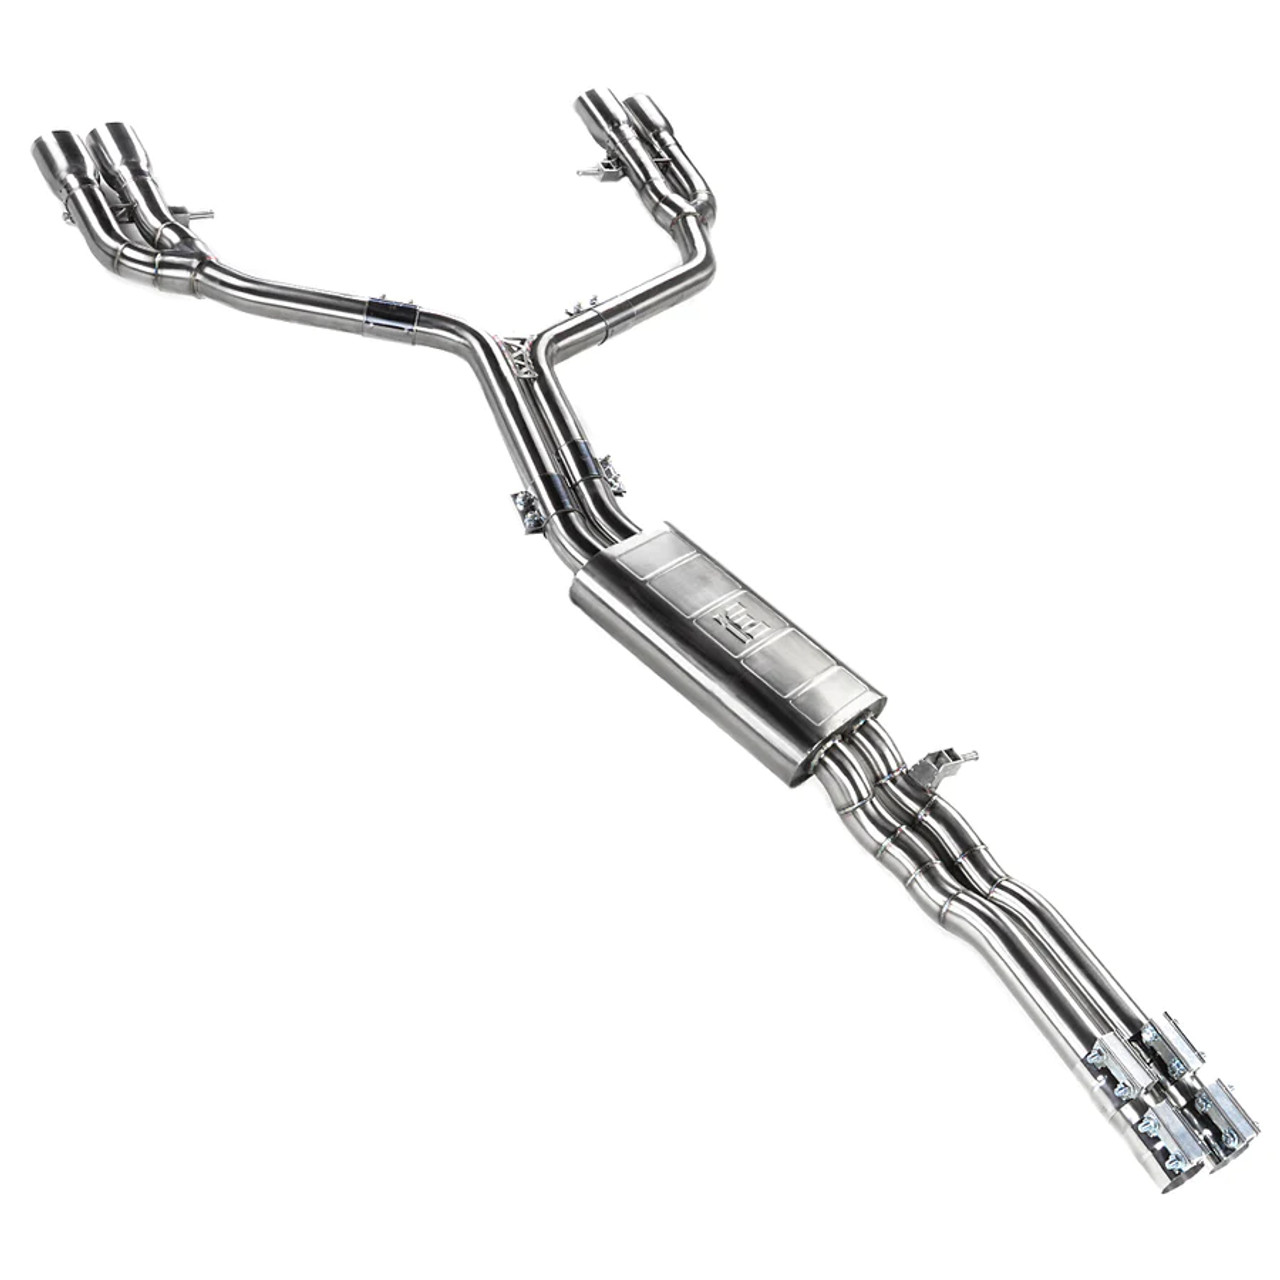 IE Catback Exhaust System for B9/B9.5 S4